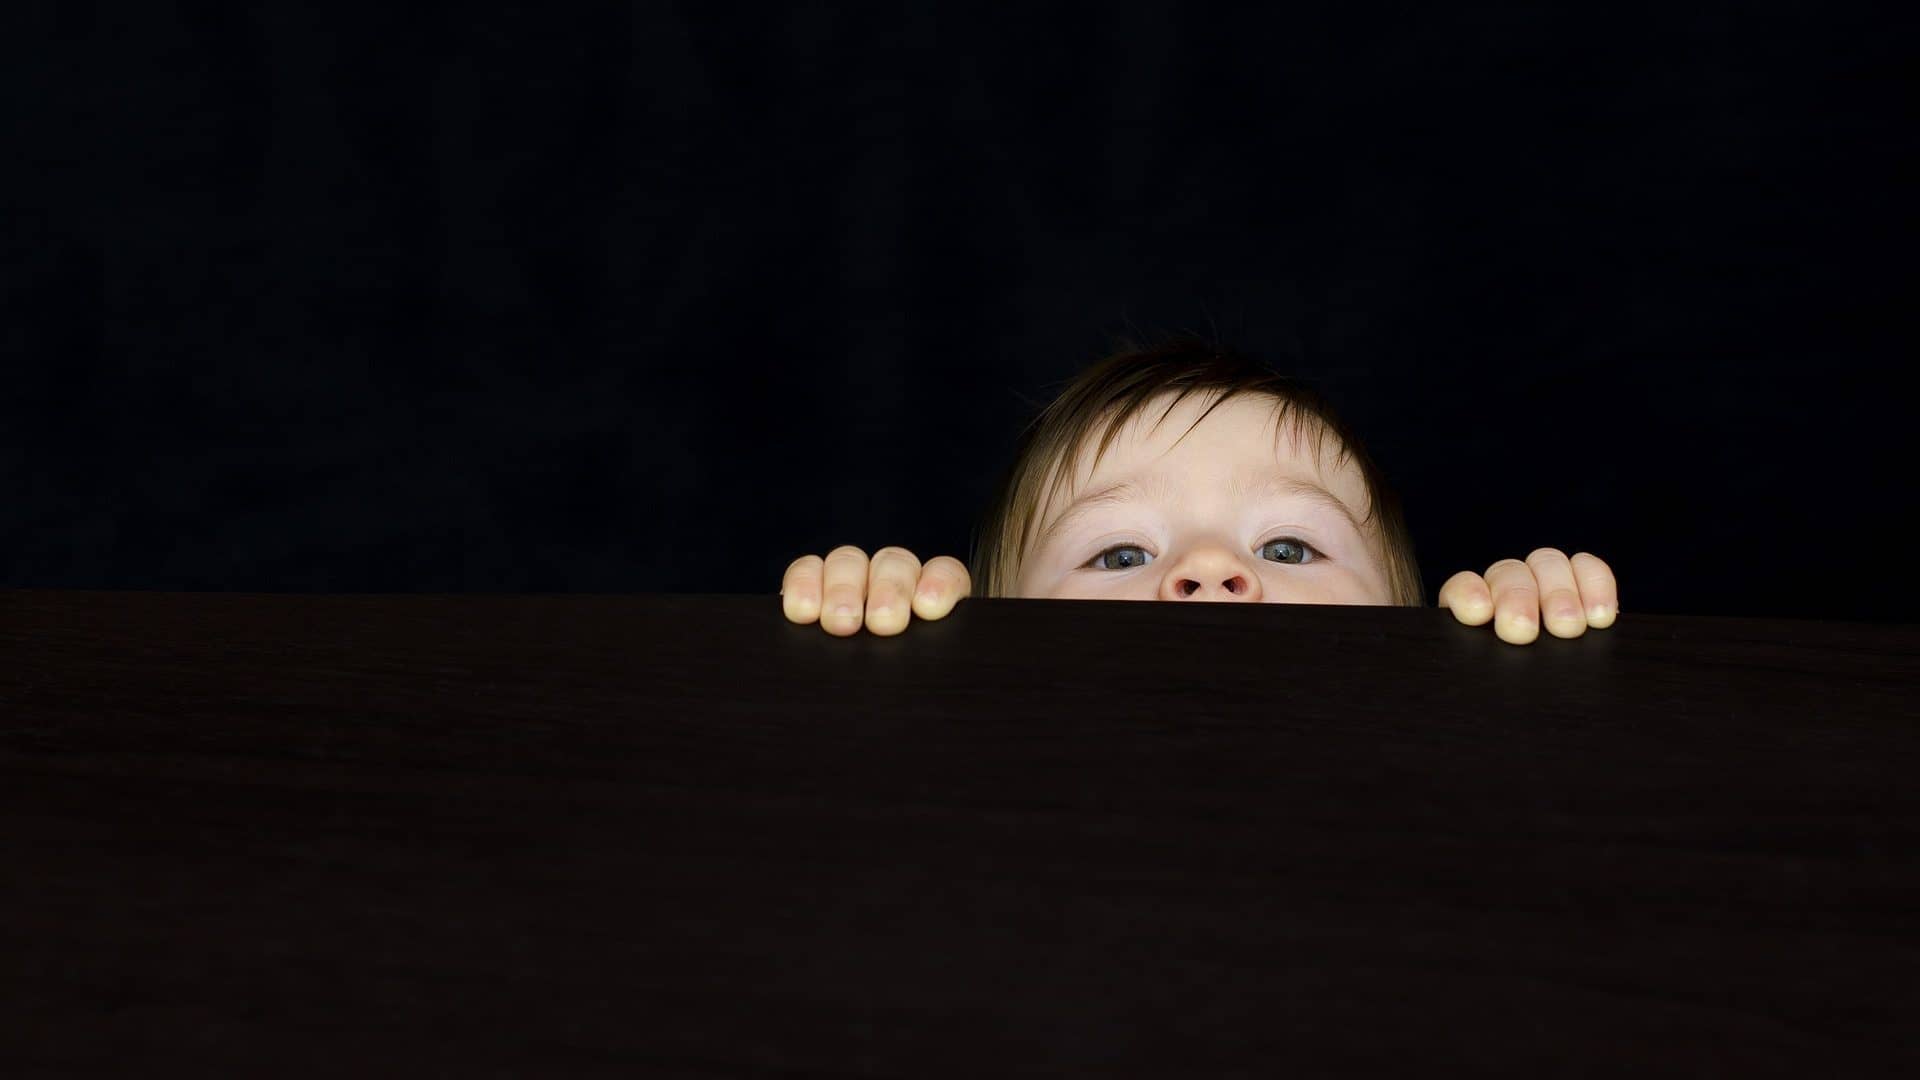 Image: A little boy peeking over a black wall, only eyes, nose and hands showing.